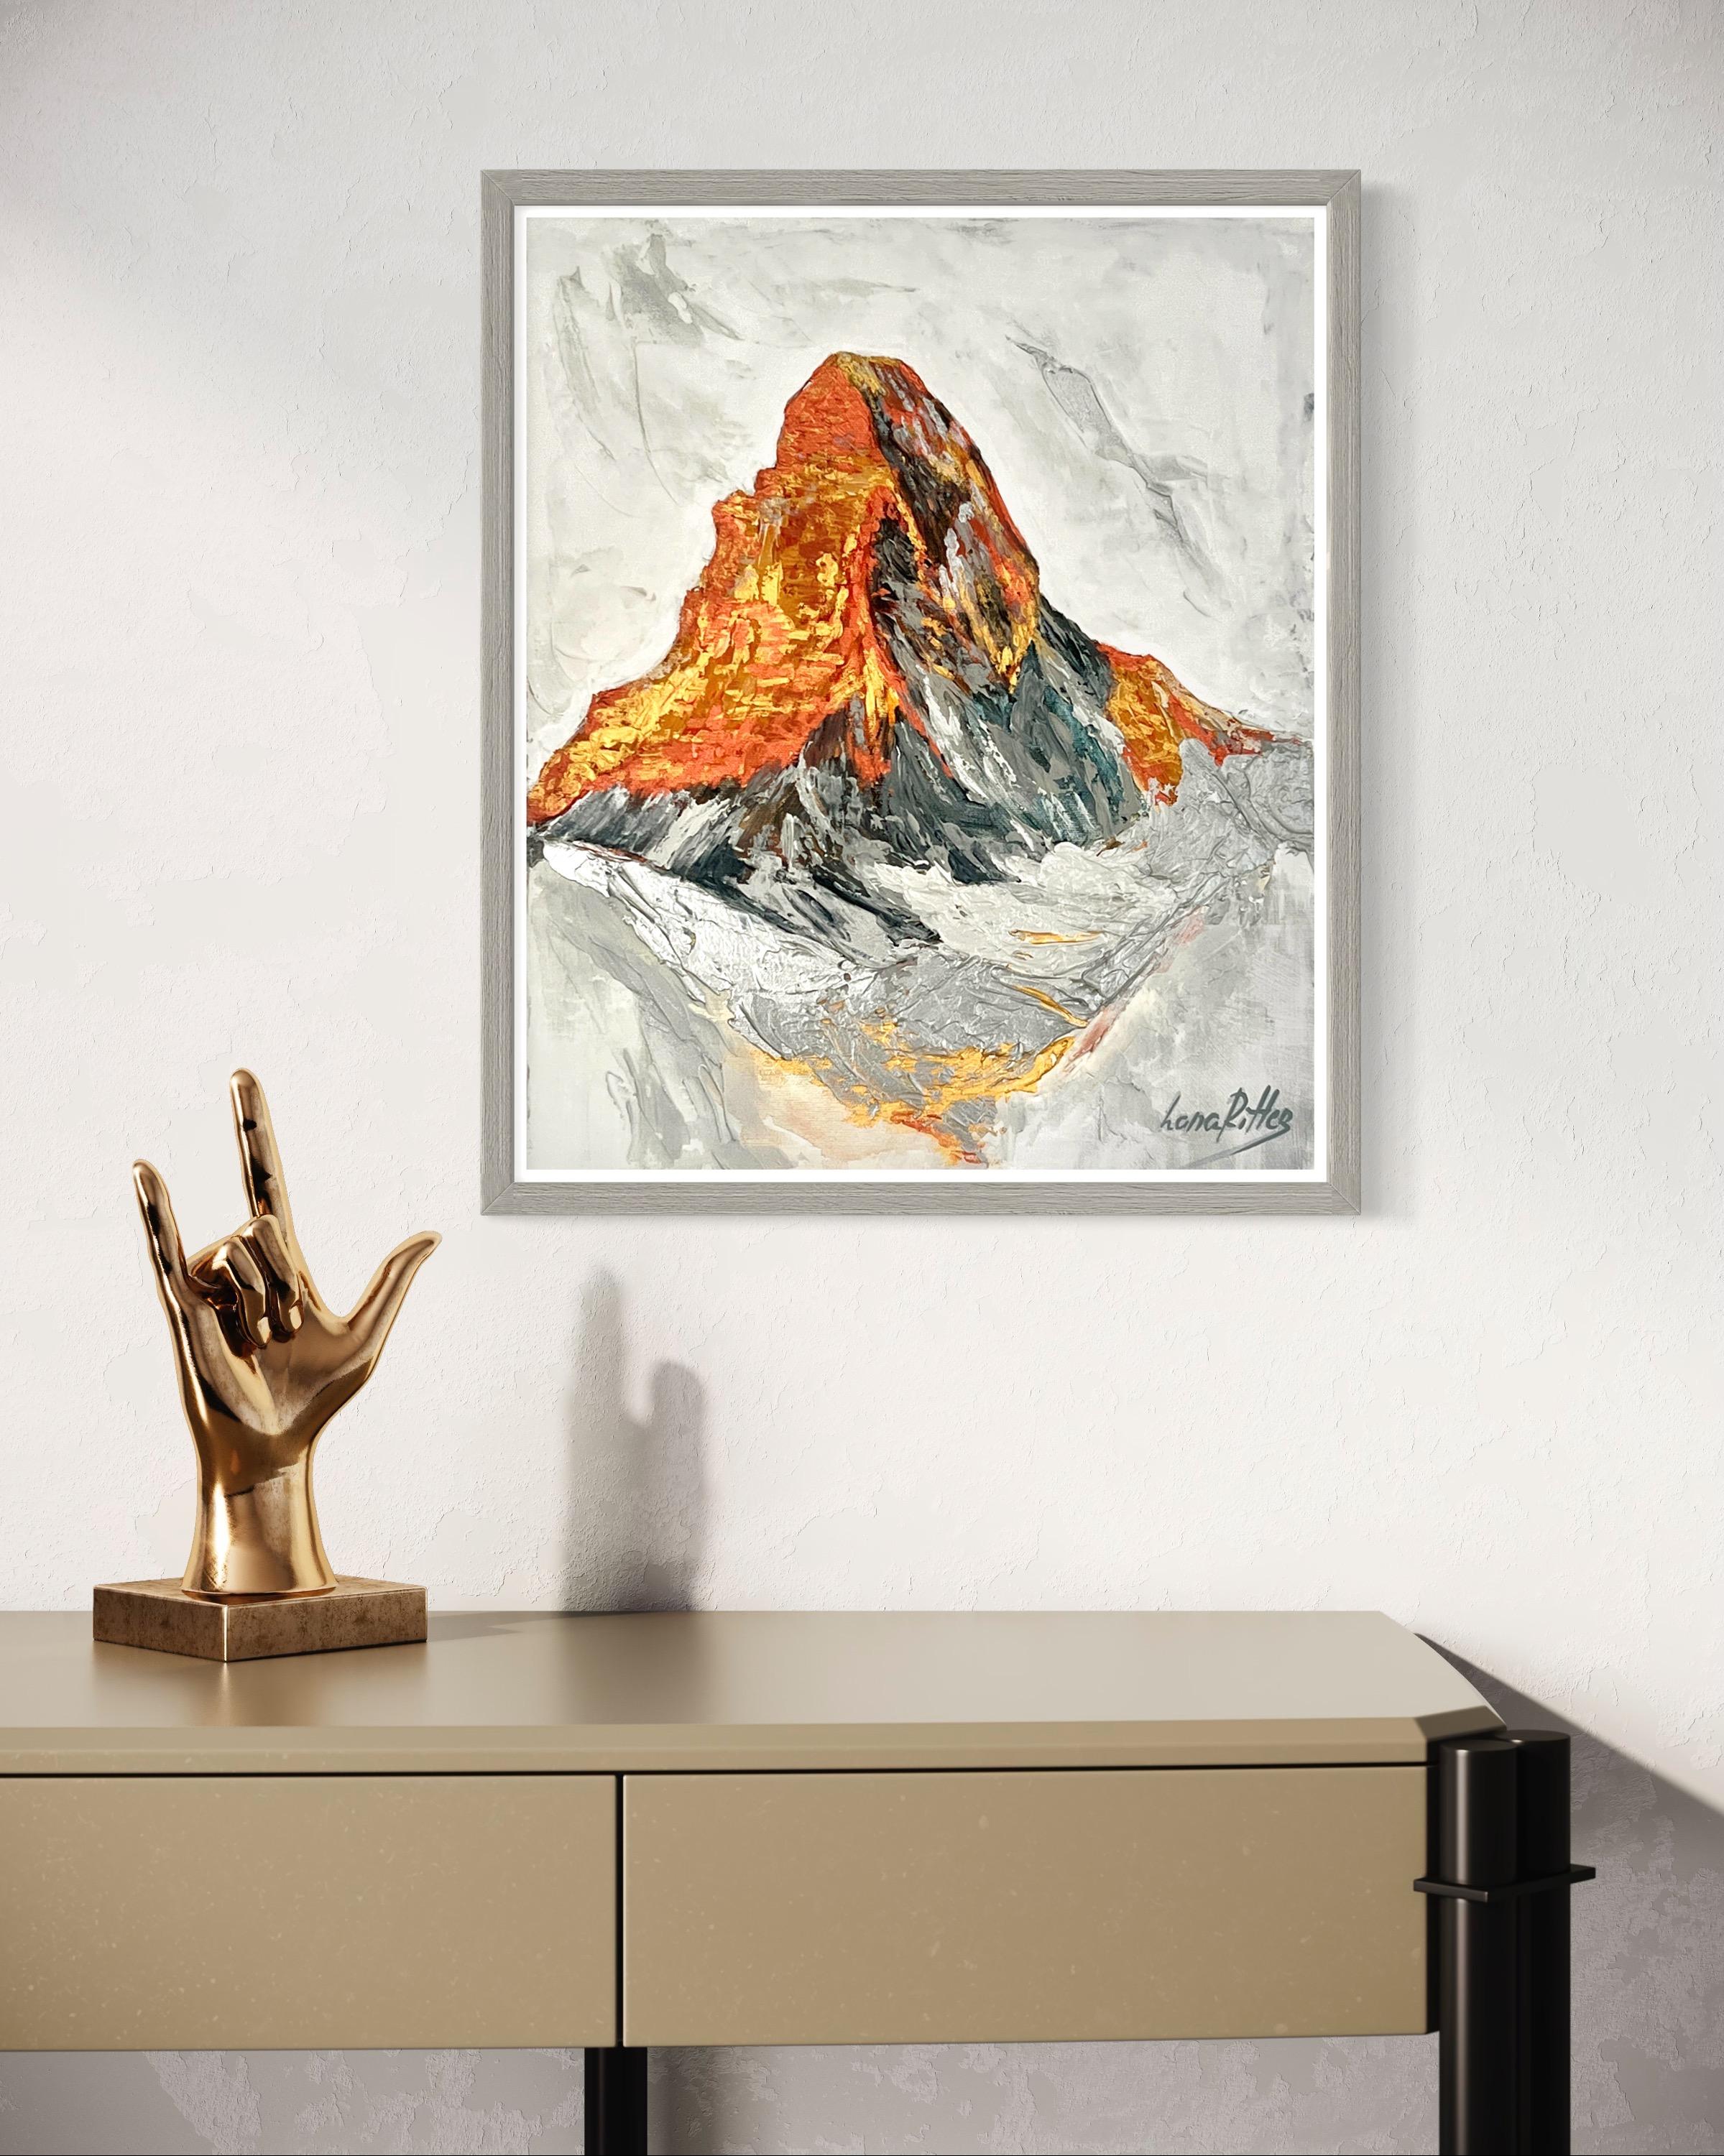 What inspired the creation of this landscape abstraction:
The wonderful copper light of sunset at the famous mountain, Matterhorn. The play of sunshine and snow.
Details:
- Materials used: heavy and soft acrylic gel, acrylic colours, gesso,